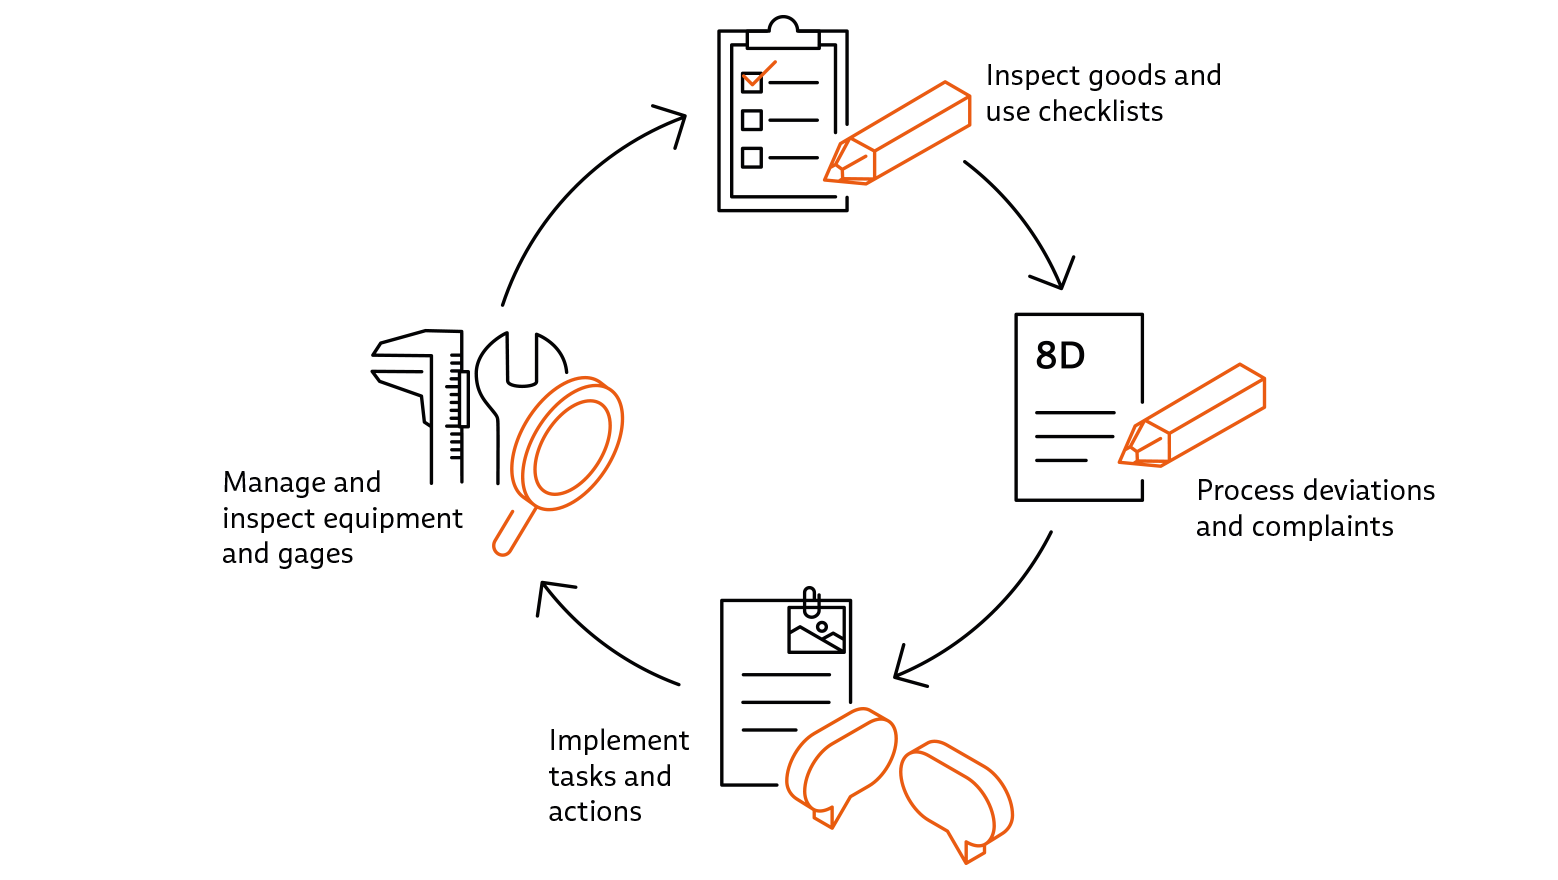 Graphical representation of the small quality control loop with icons